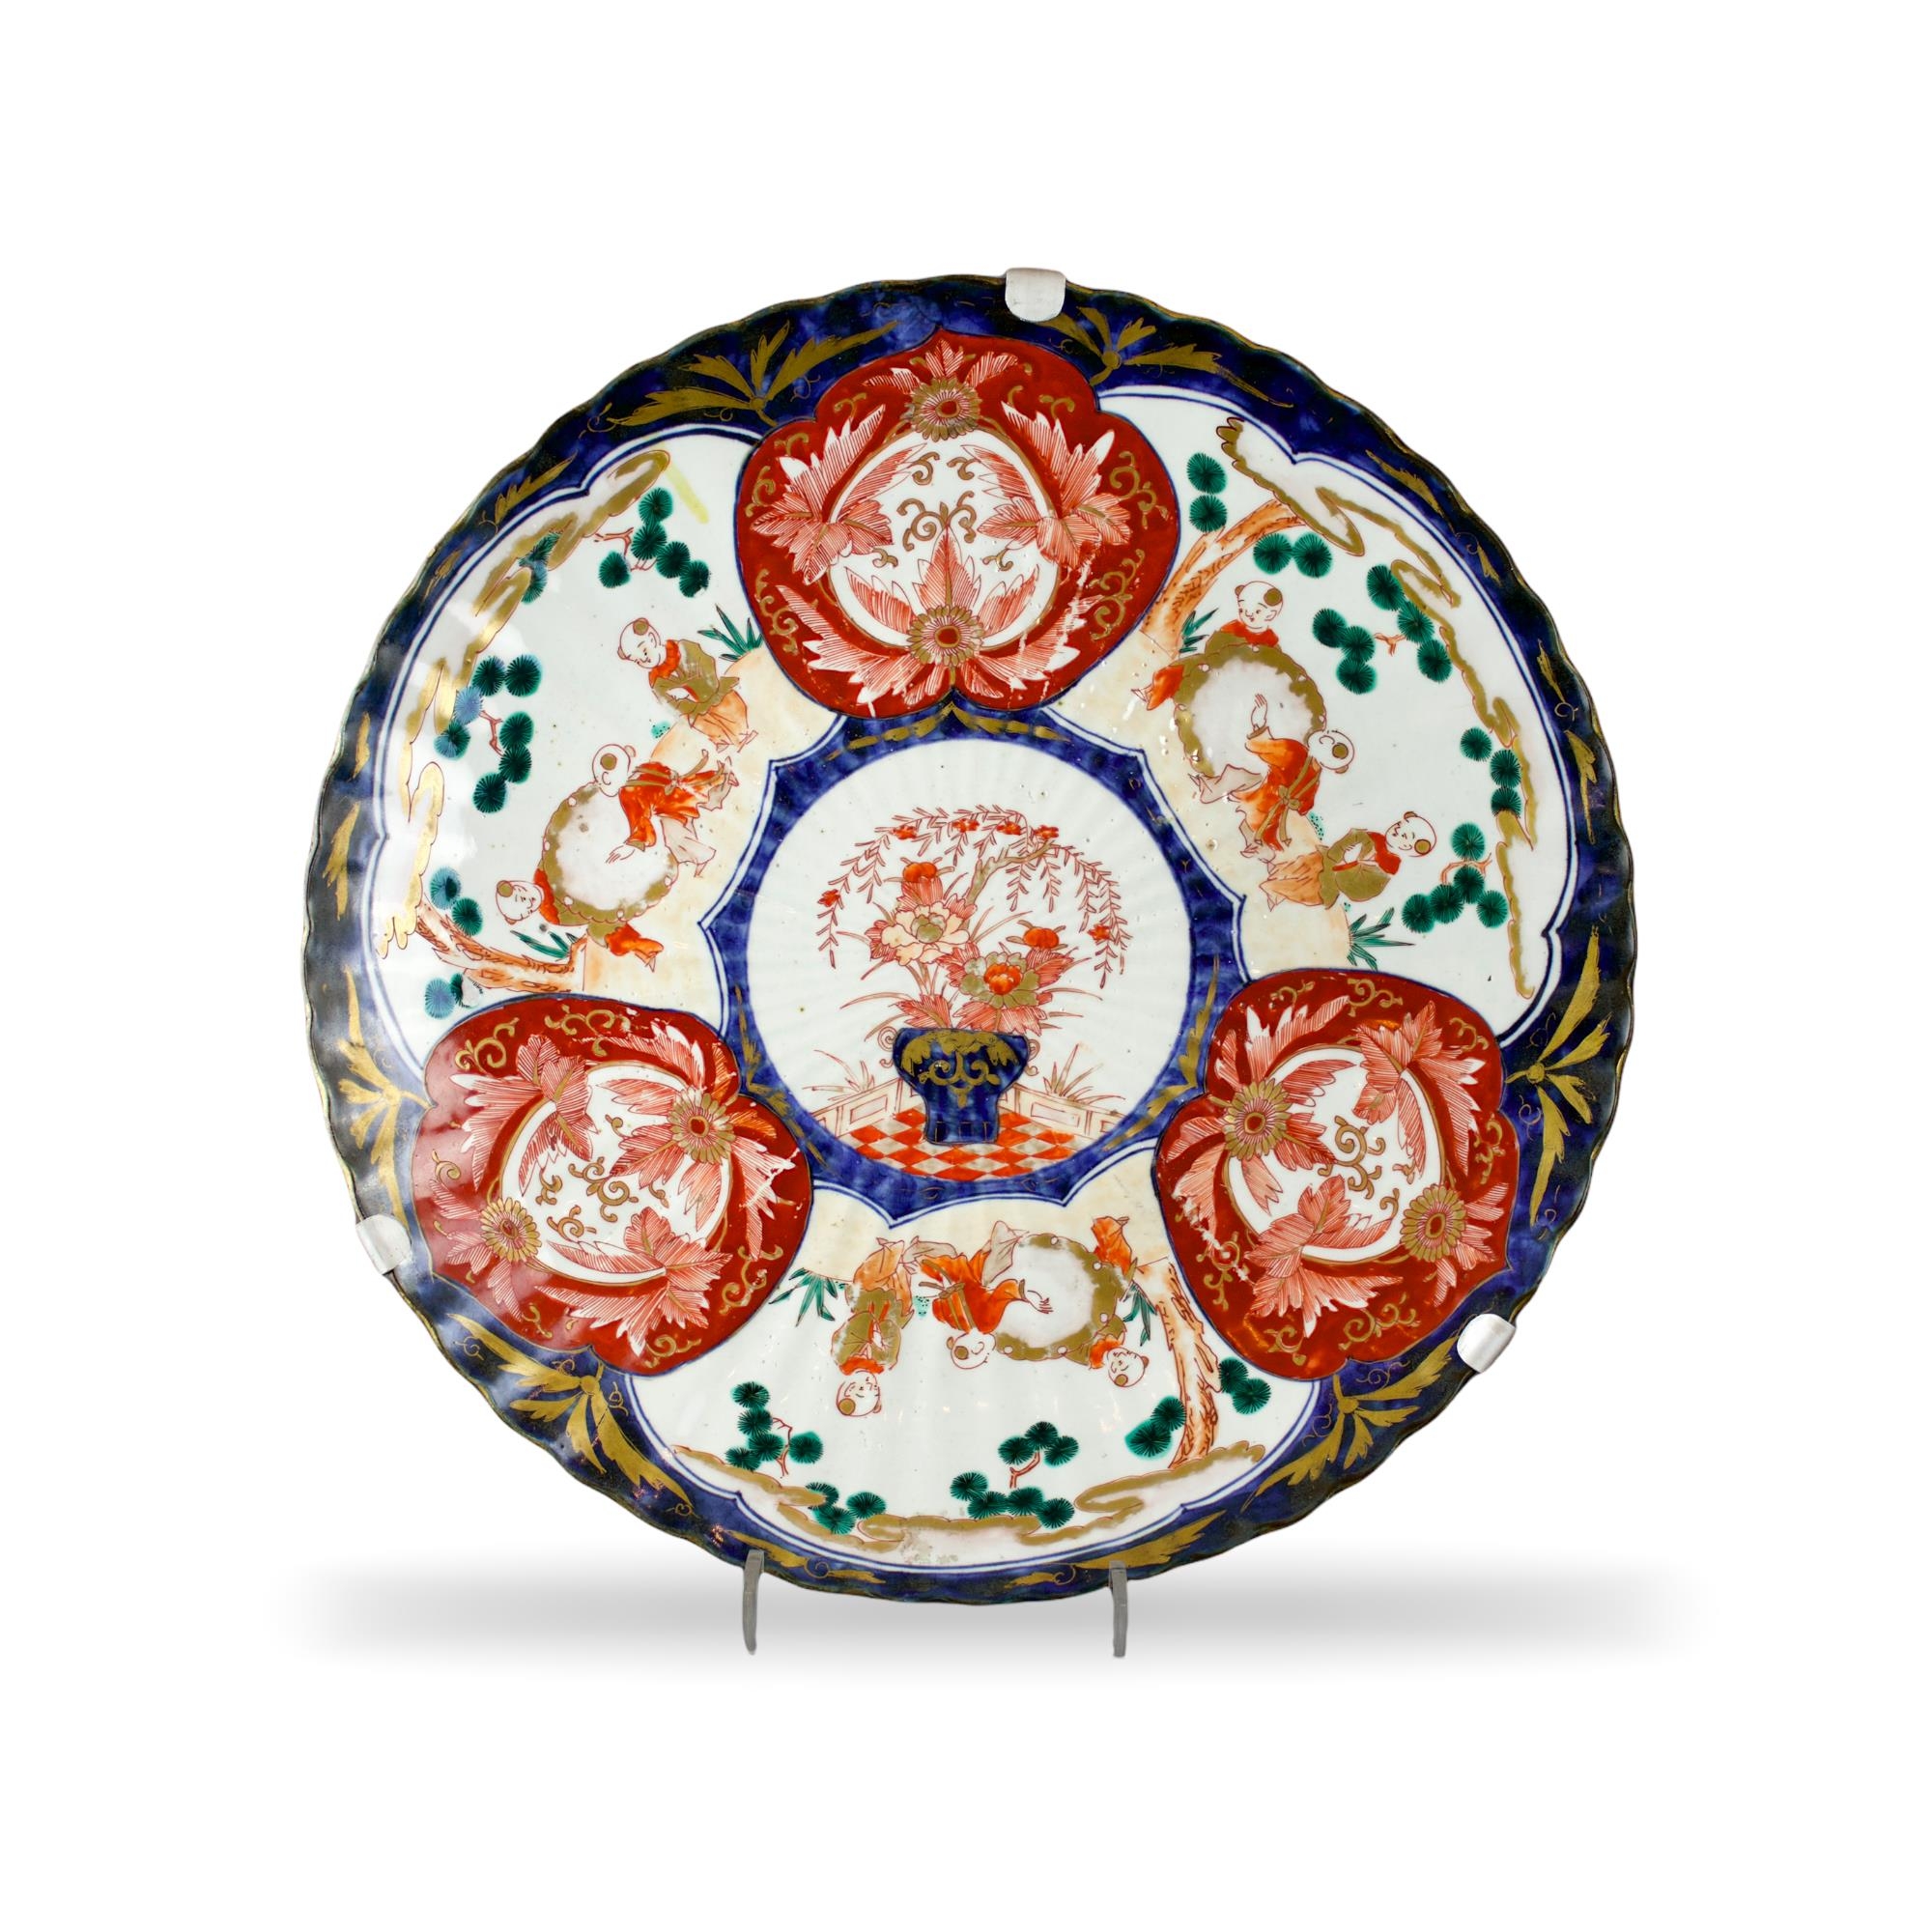 A Japanese Imari Fluted Dish, c. 1900 - - W45.5cm H5.5cm - - the shallow well with three vignettes